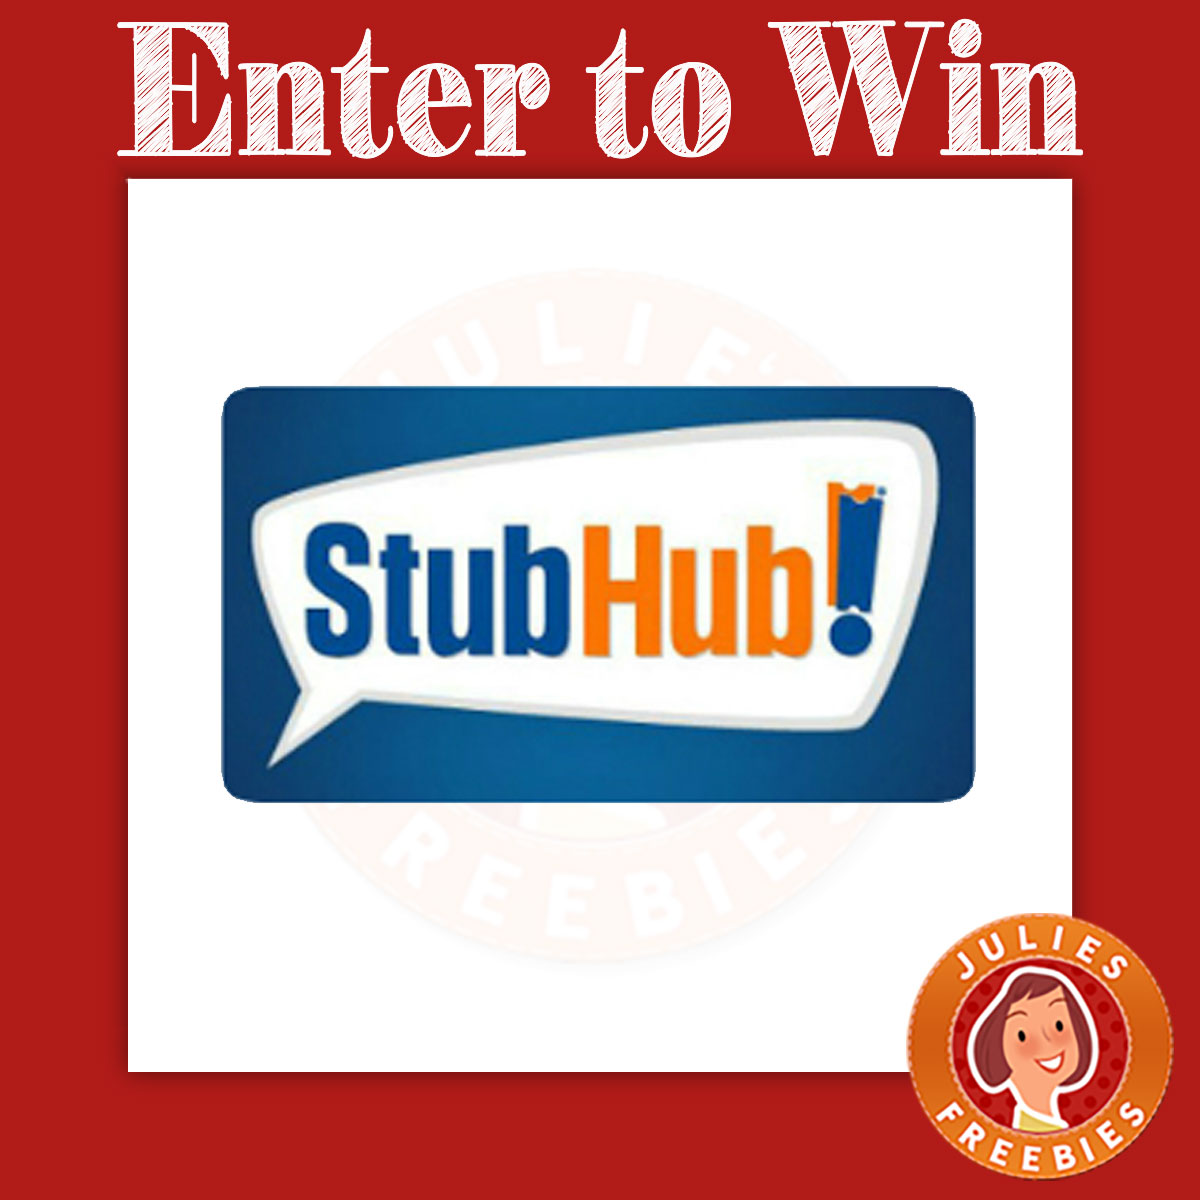 Coors Light Pour and Score Sweepstakes and Instant Win